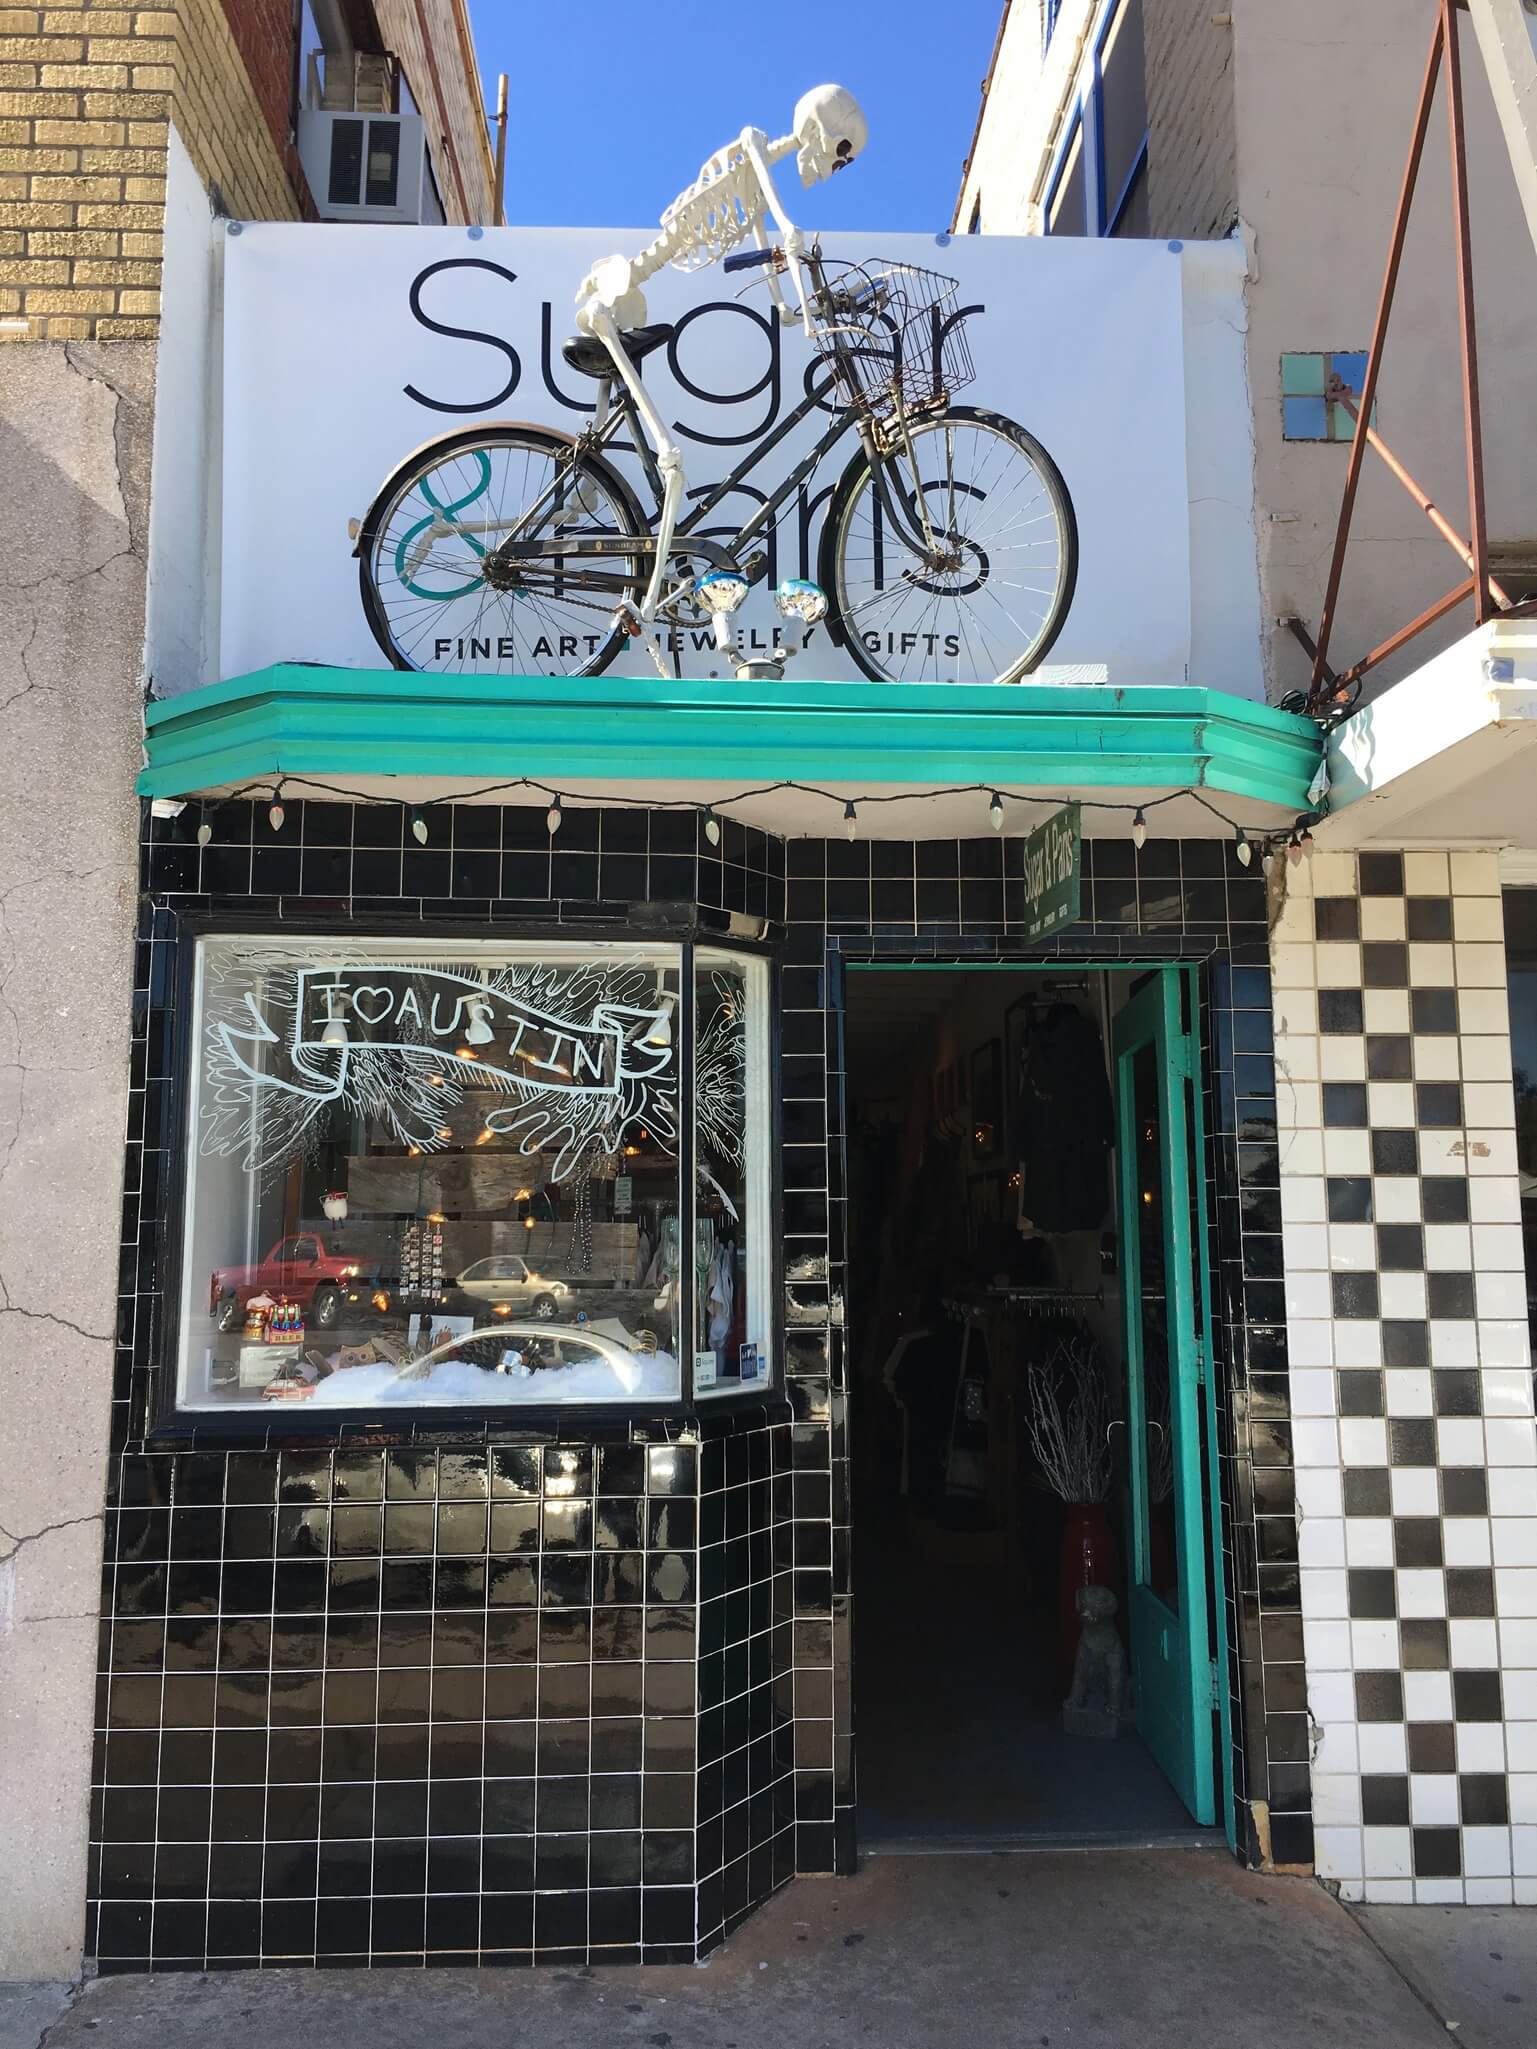 Exterior of Sugar & Paris store on South Congress, black tile with teal doorway and skeleton on bicycle over entrance